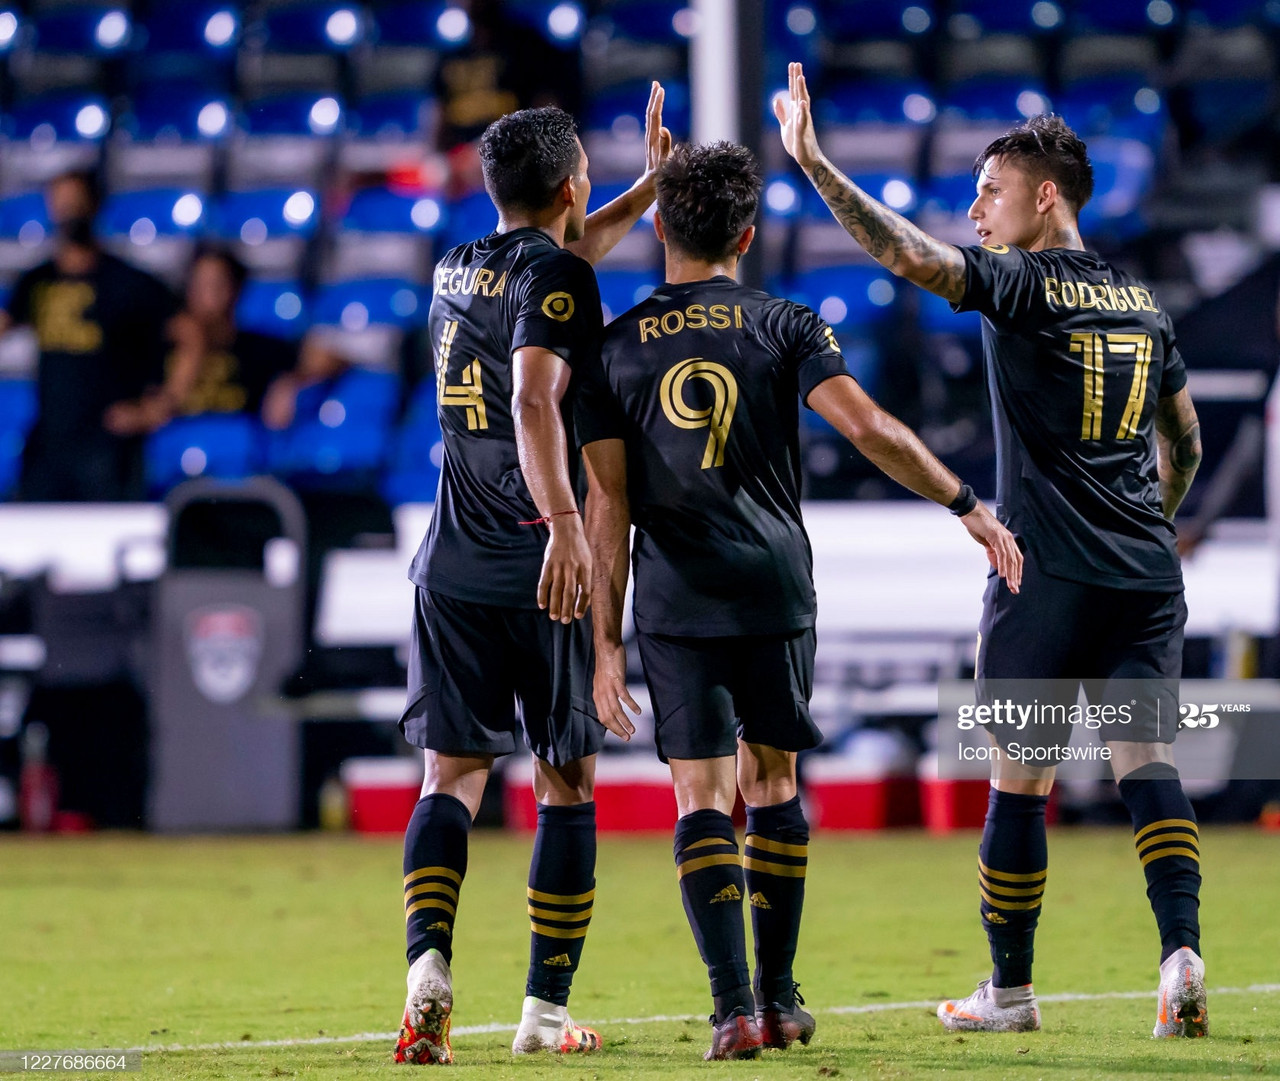 LAFC 6-2 LA Galaxy: Rossi bags four as FC cruise to victory